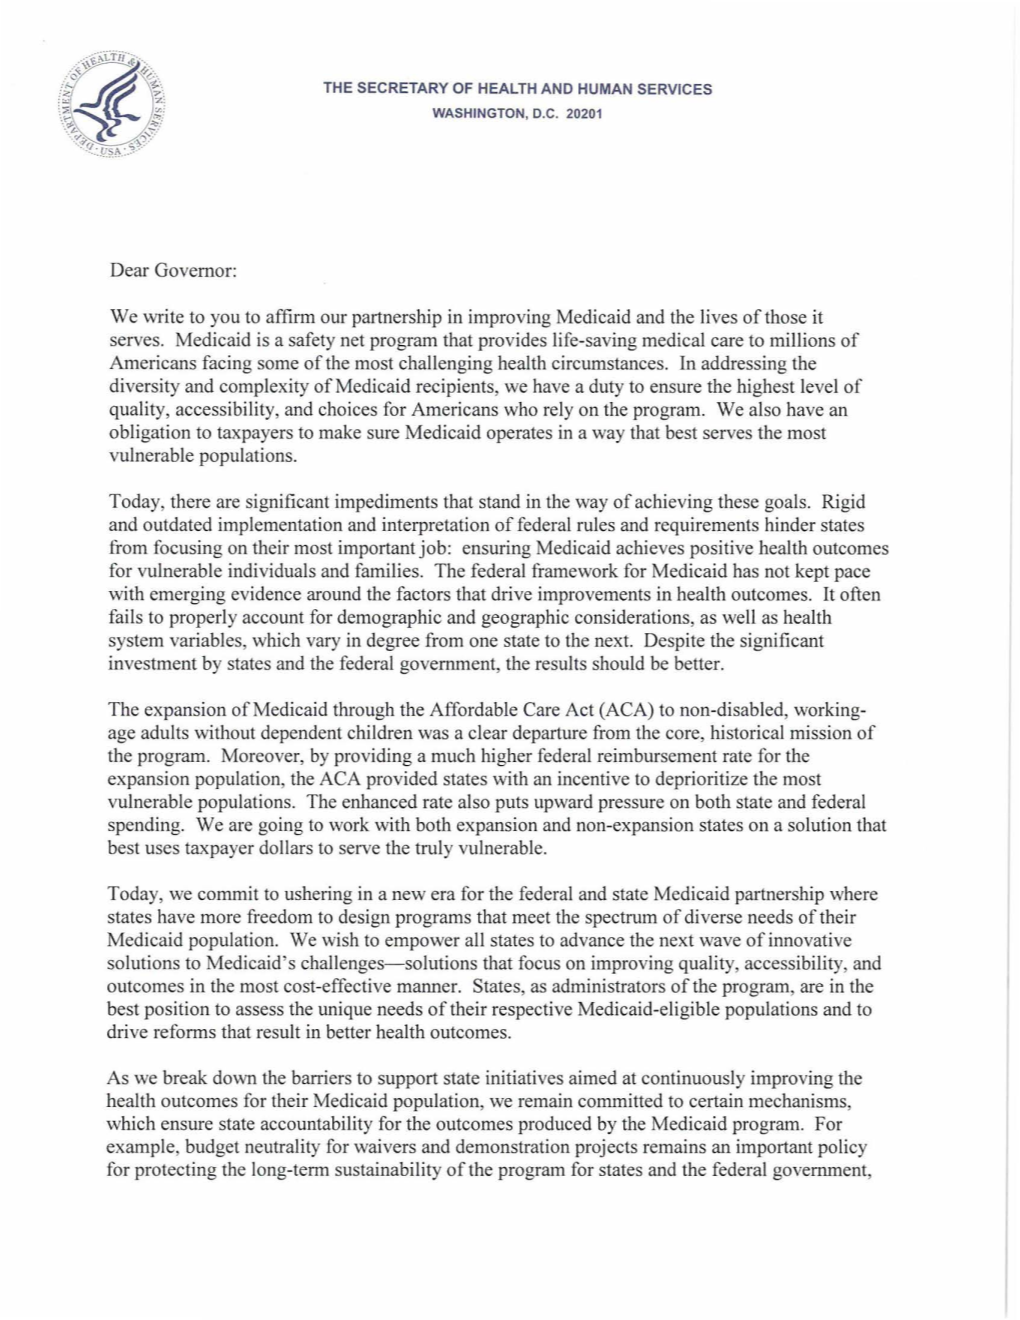 Secretary Price and CMS Administrator Verma Letter